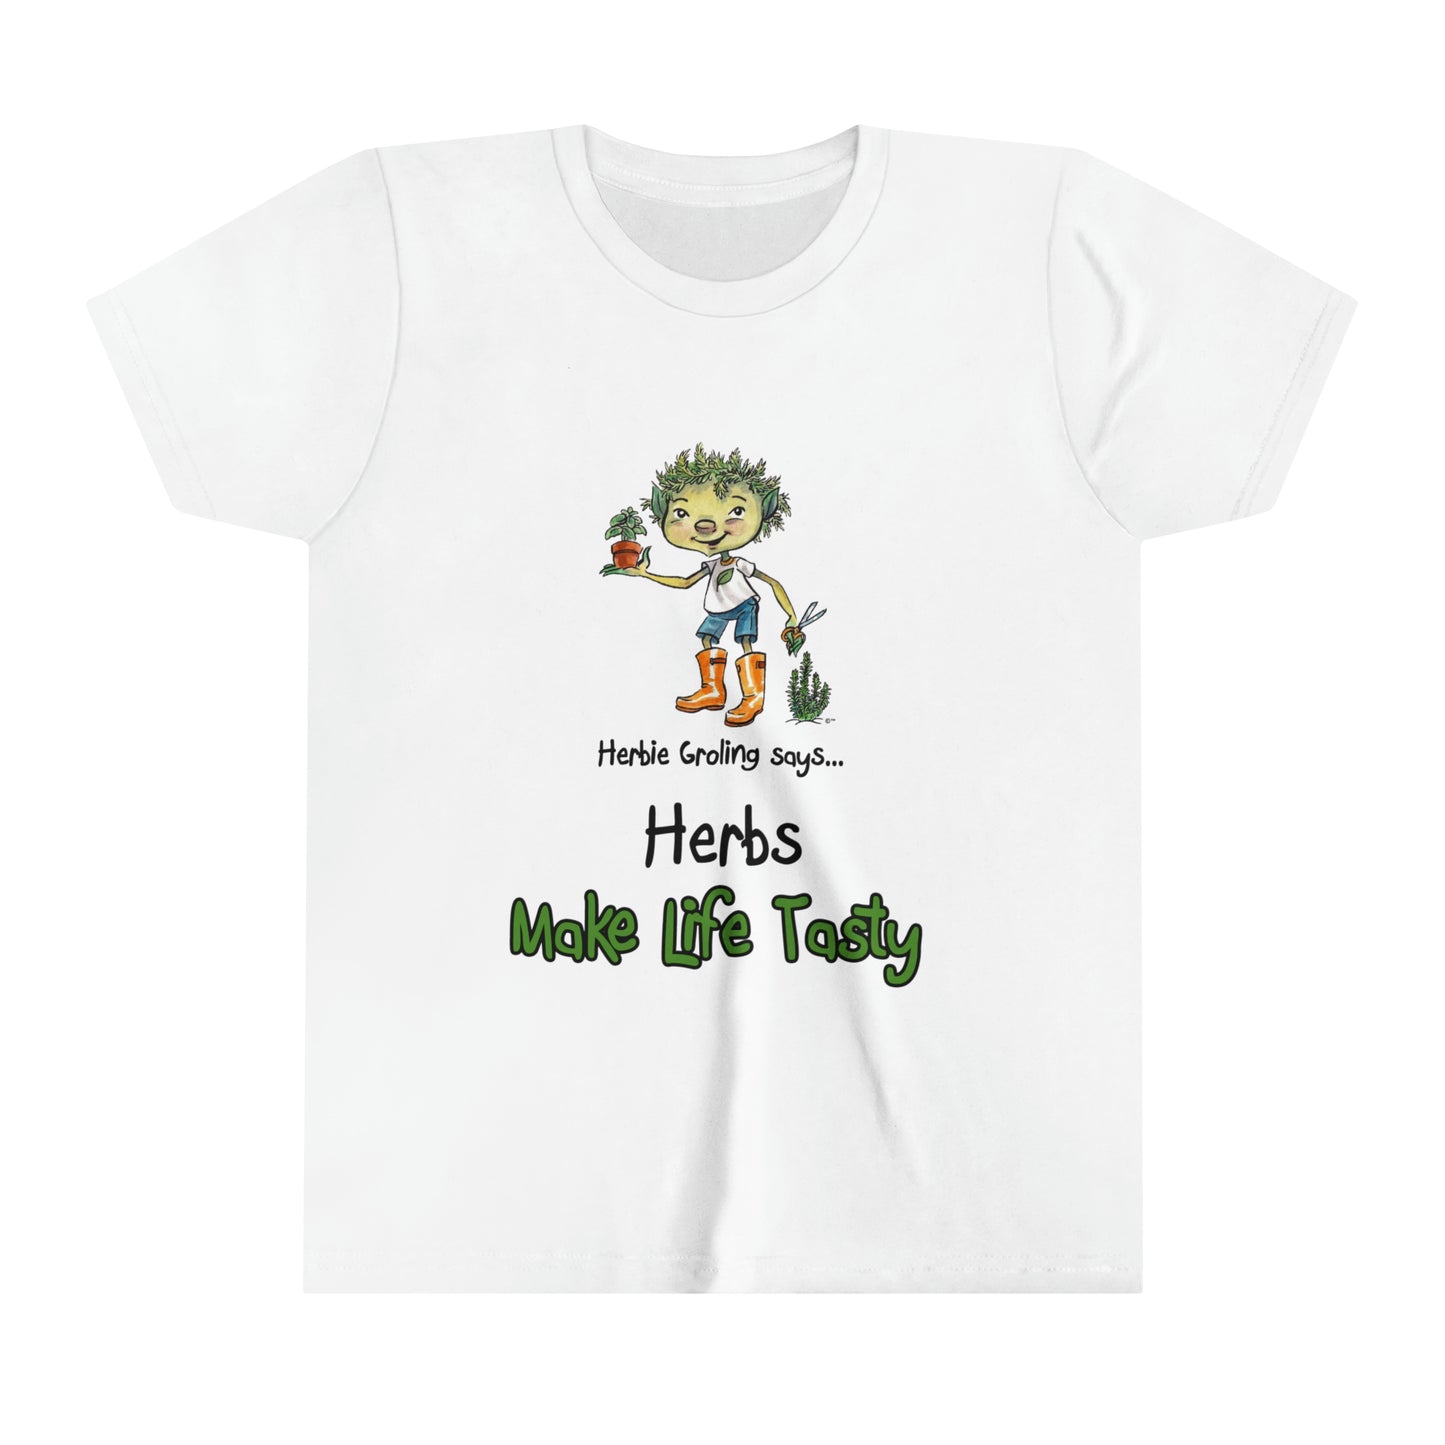 A white official Grolings kids' t-shirt, featuring the phrase 'Herbie Groling says... Herbs Make Life Tasty. The t-shirt showcases Herbie Groling, holding a basil plant in a pot. Beside Herbie, a thriving rosemary bush adds to the scene. The imagery highlights the delightful flavours and aromatic qualities that herbs bring to our lives, encouraging an appreciation for the culinary joys and benefits of herbs.